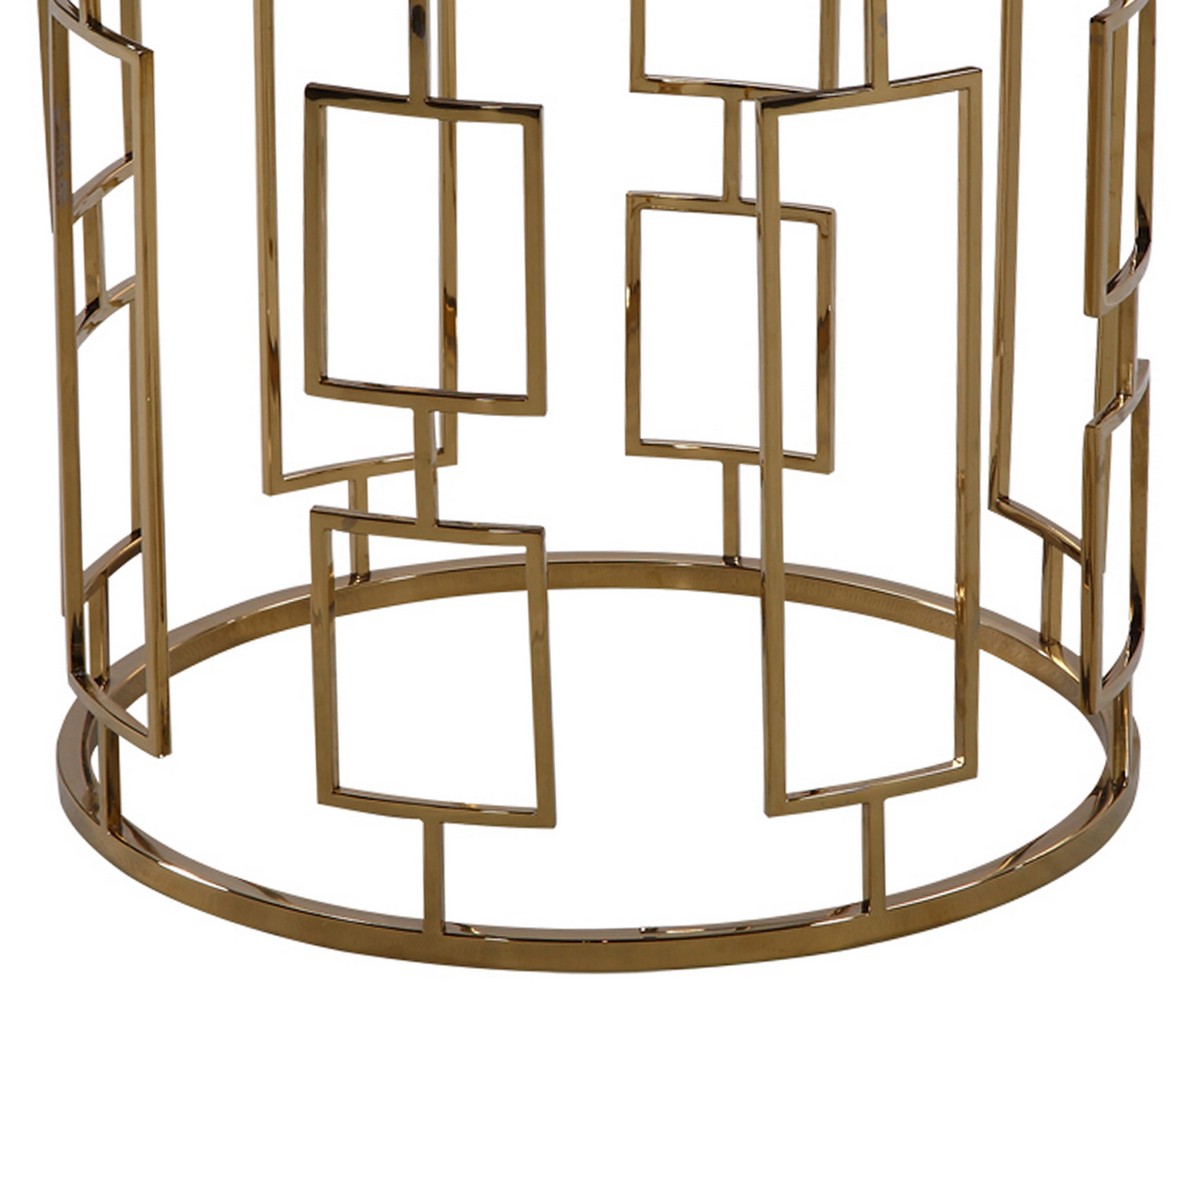 Armen Living Zinc Contemporary End Table In Shiny Gold With Smoked Glass